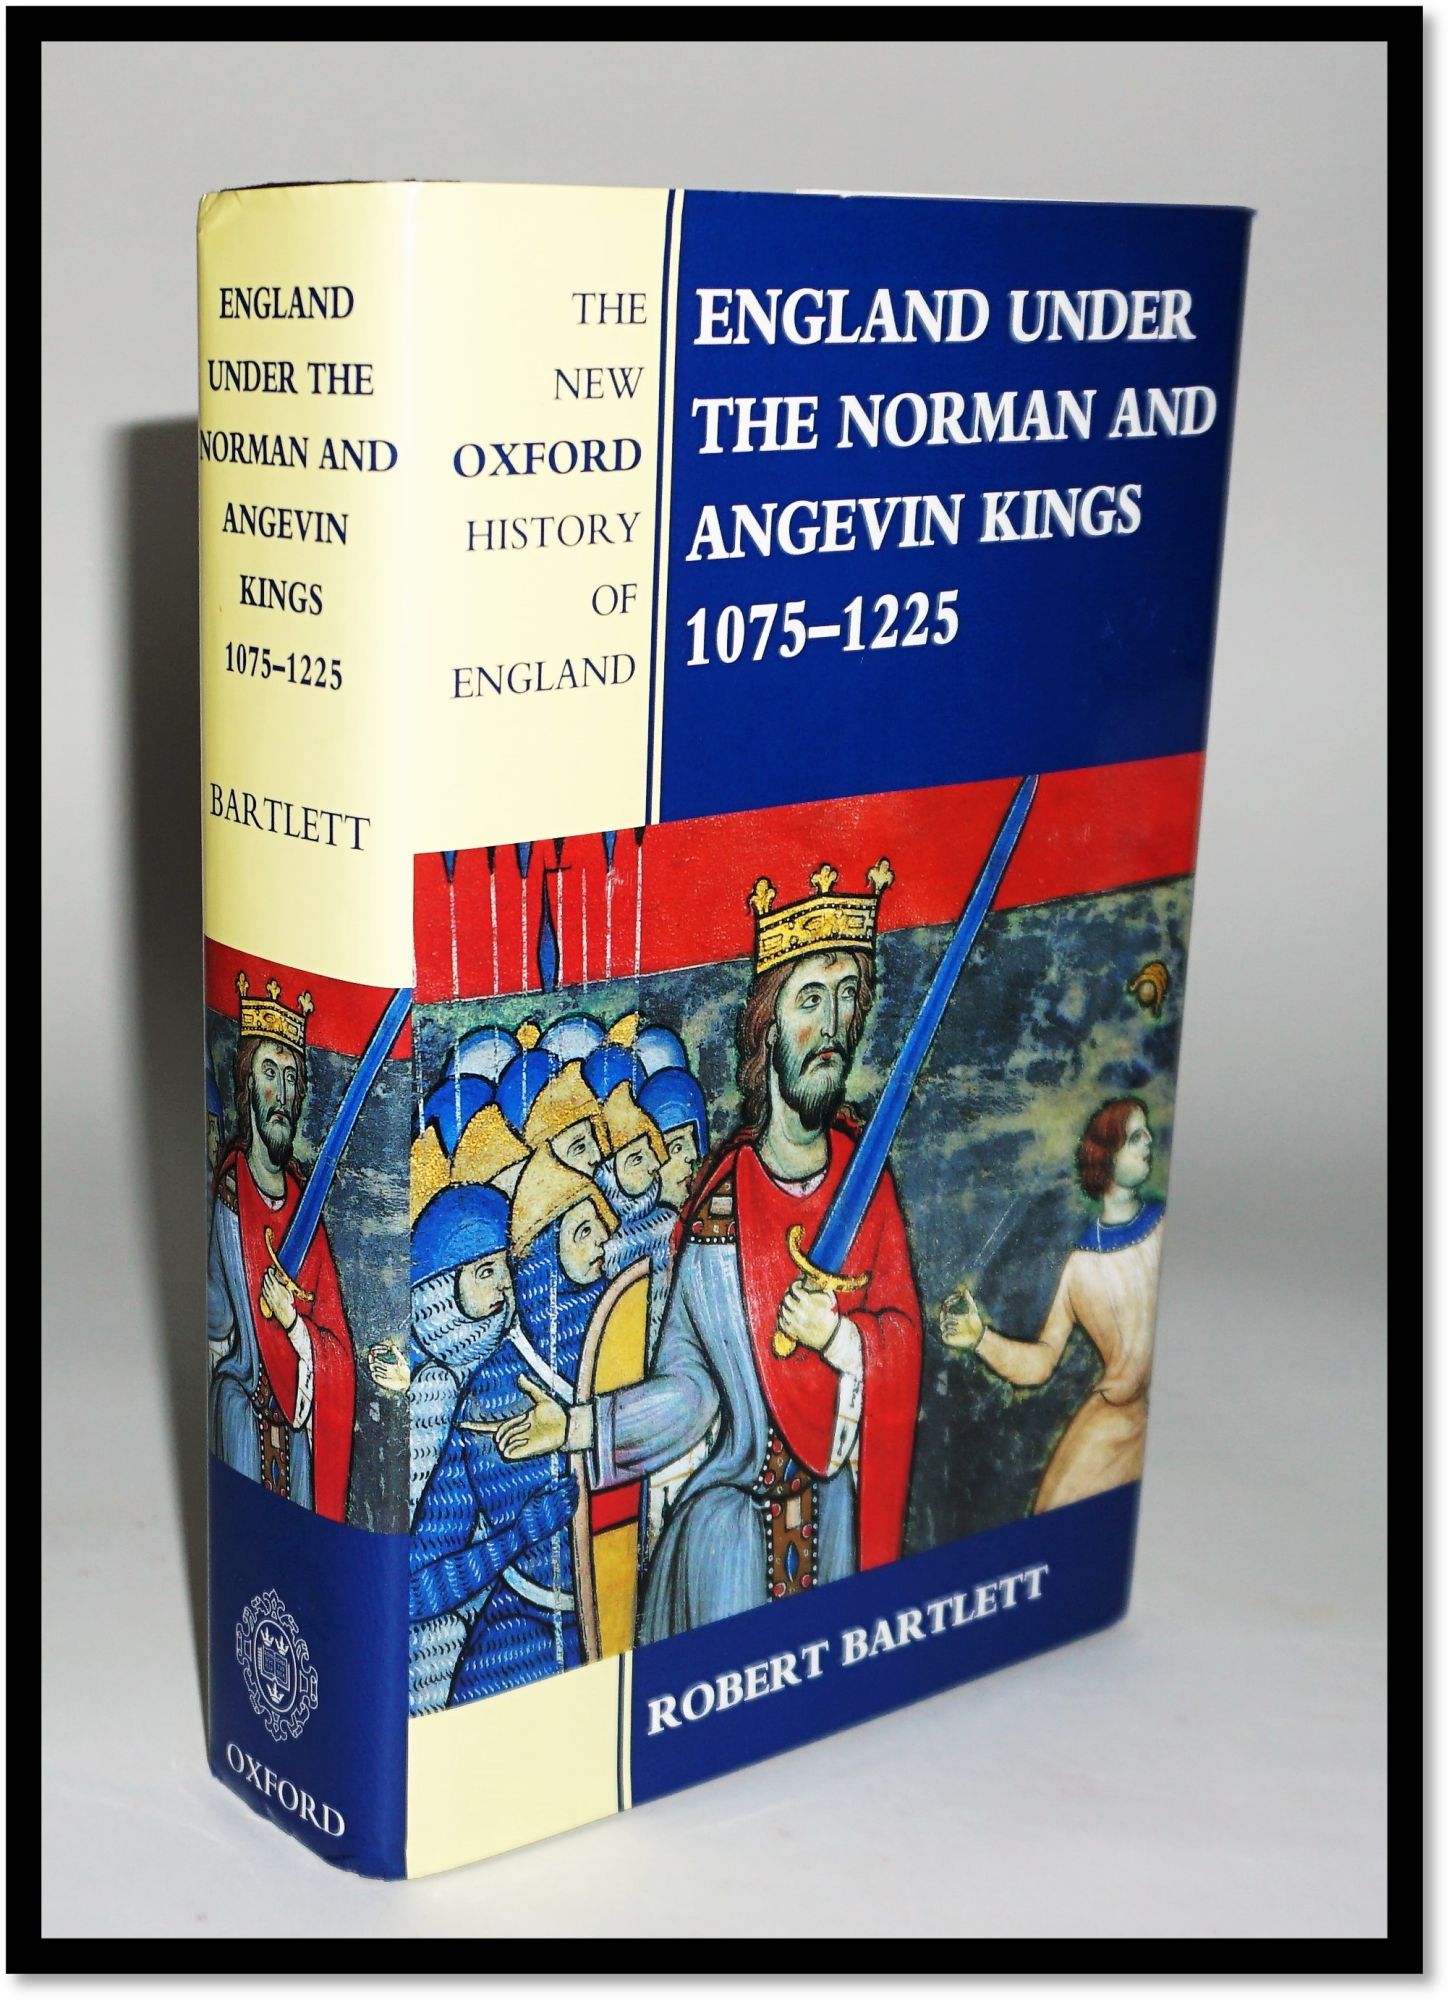 England Under the Norman and Angevin Kings, 1075-1225 New Oxford